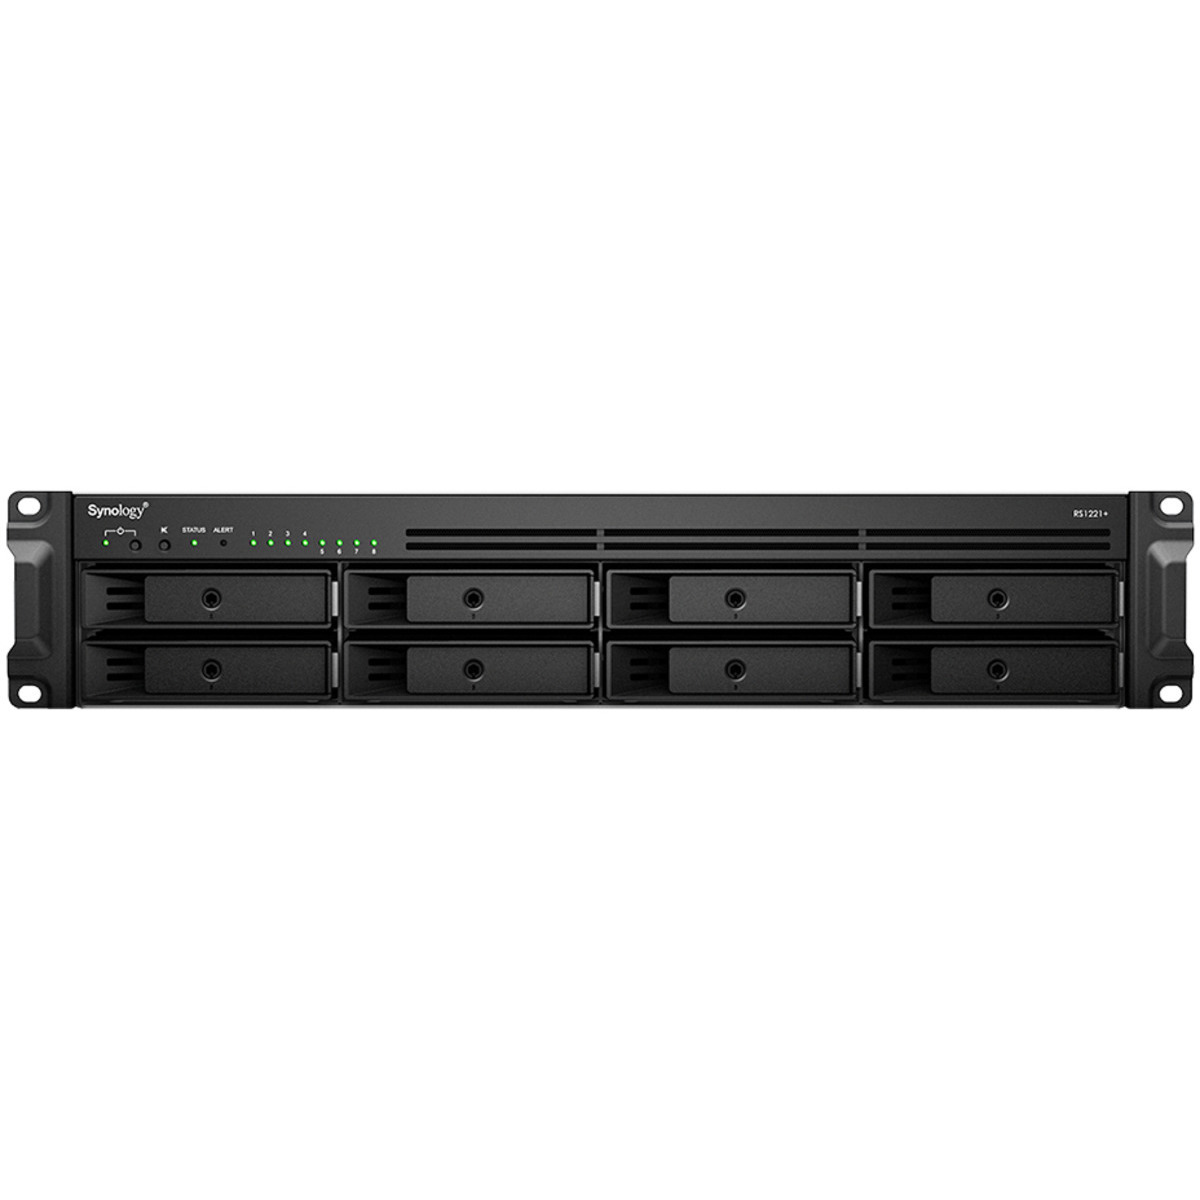 Synology RackStation RS1221+ RackMount 8-Bay Multimedia / Power User / Business NAS - Network Attached Storage Device Burn-In Tested Configurations RackStation RS1221+